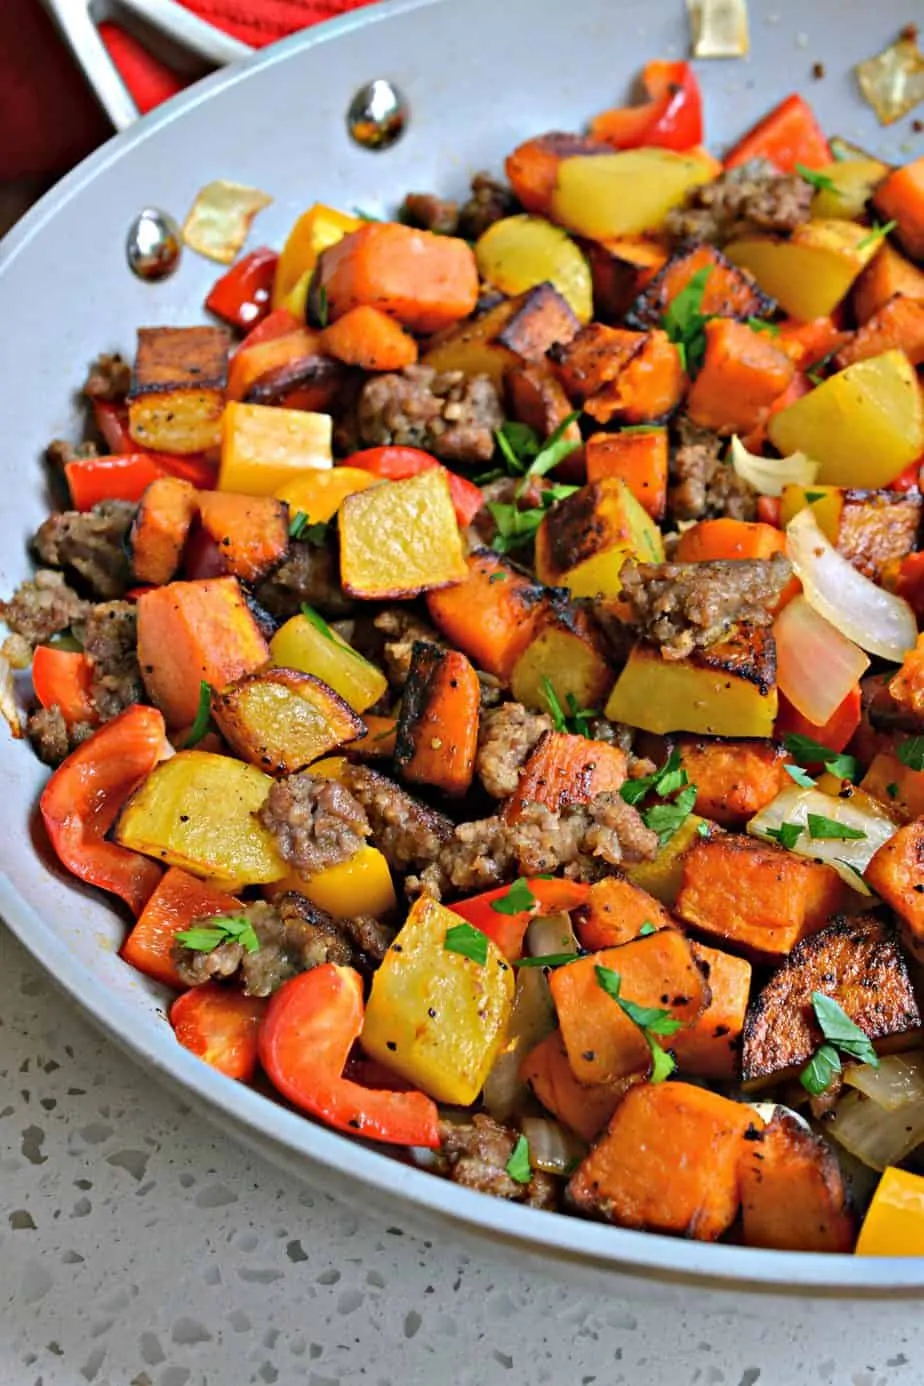 This hearty Sweet Potato hash has both sweet potatoes and gold potatoes, along with onions, bell peppers, and pork sausage. 